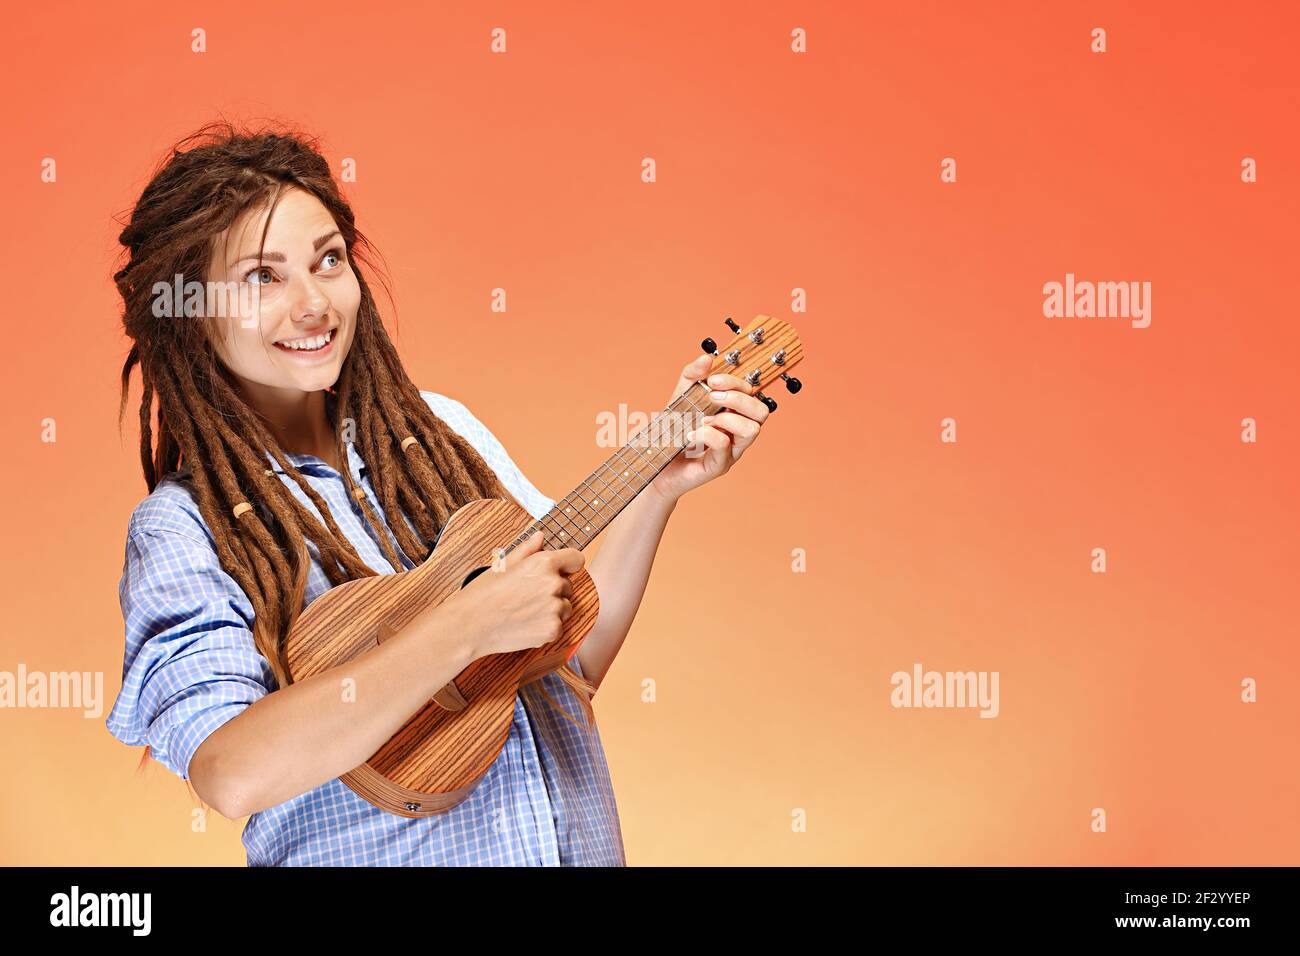 Portrait of funny young woman playing ukulele. Happiness and carefree concept Stock Photo